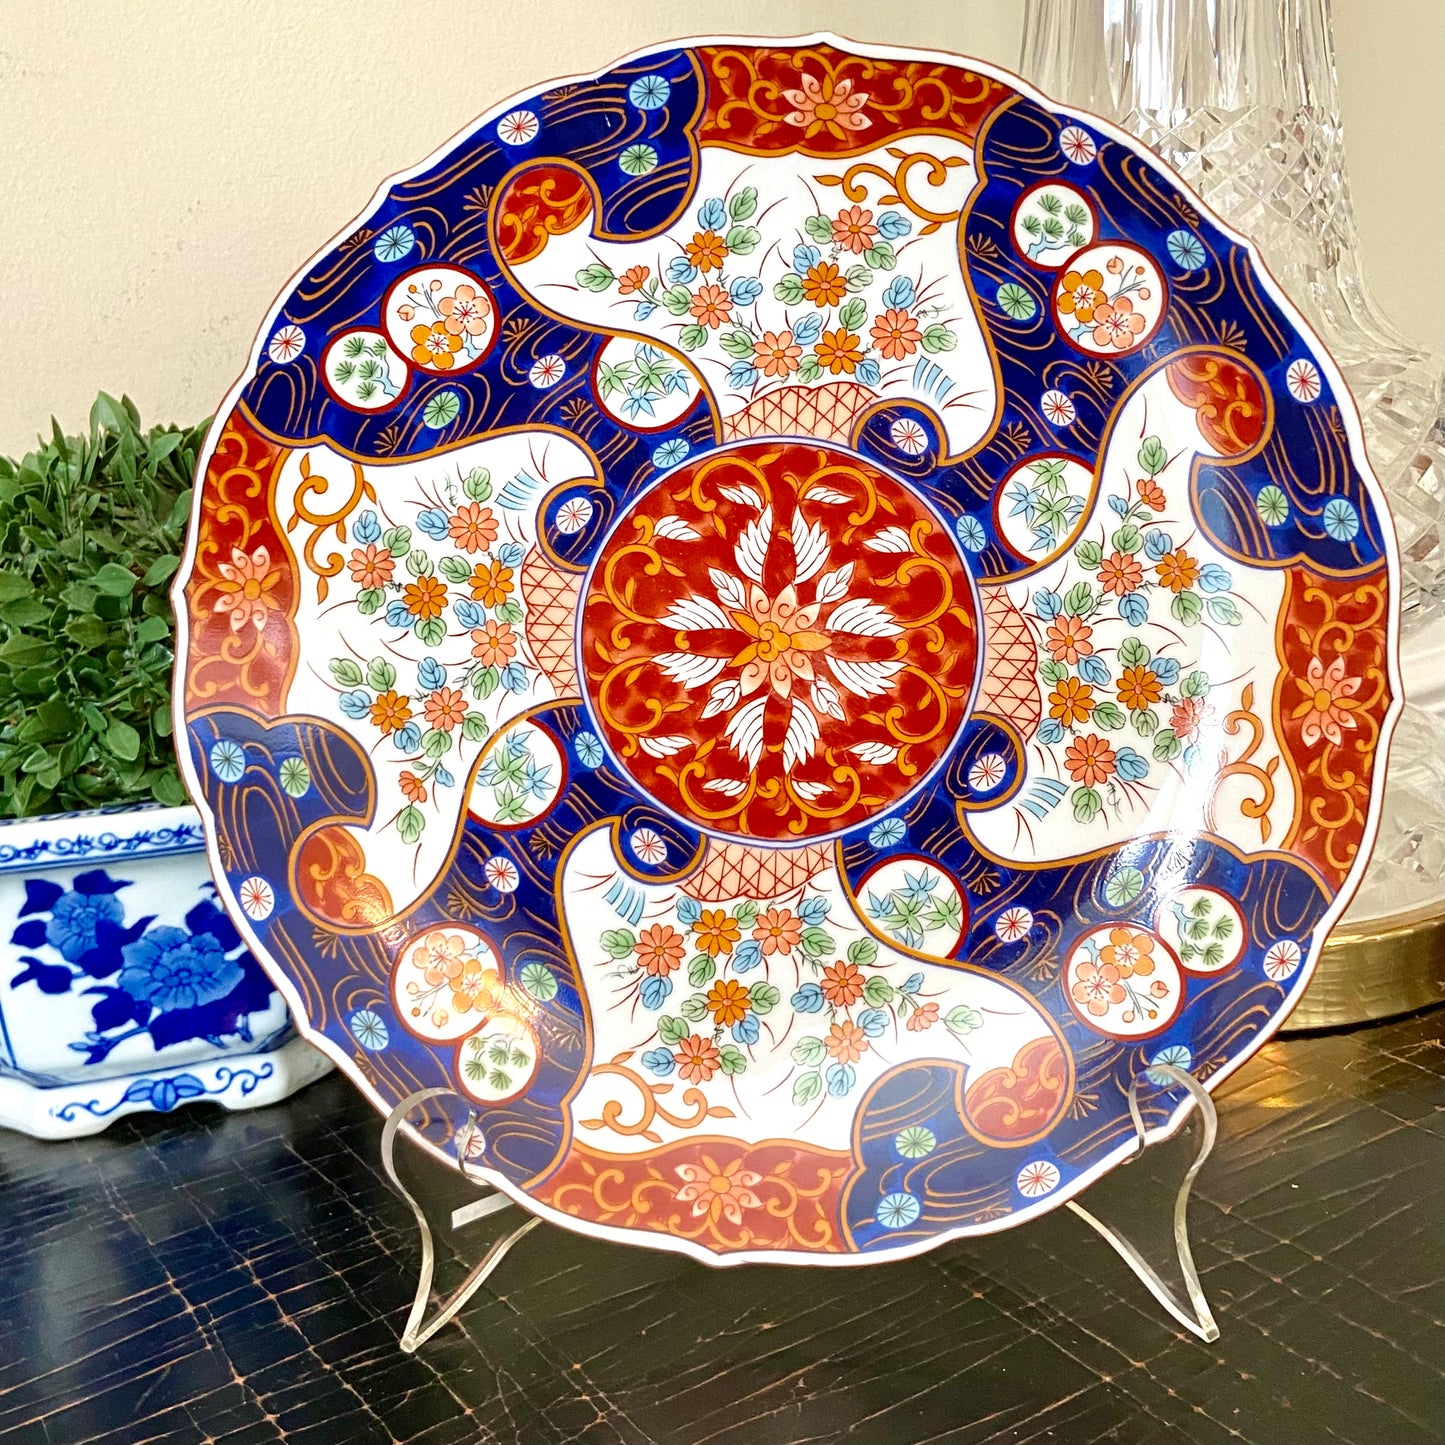 Stunning antique blue and white Imari style porcelain plate.